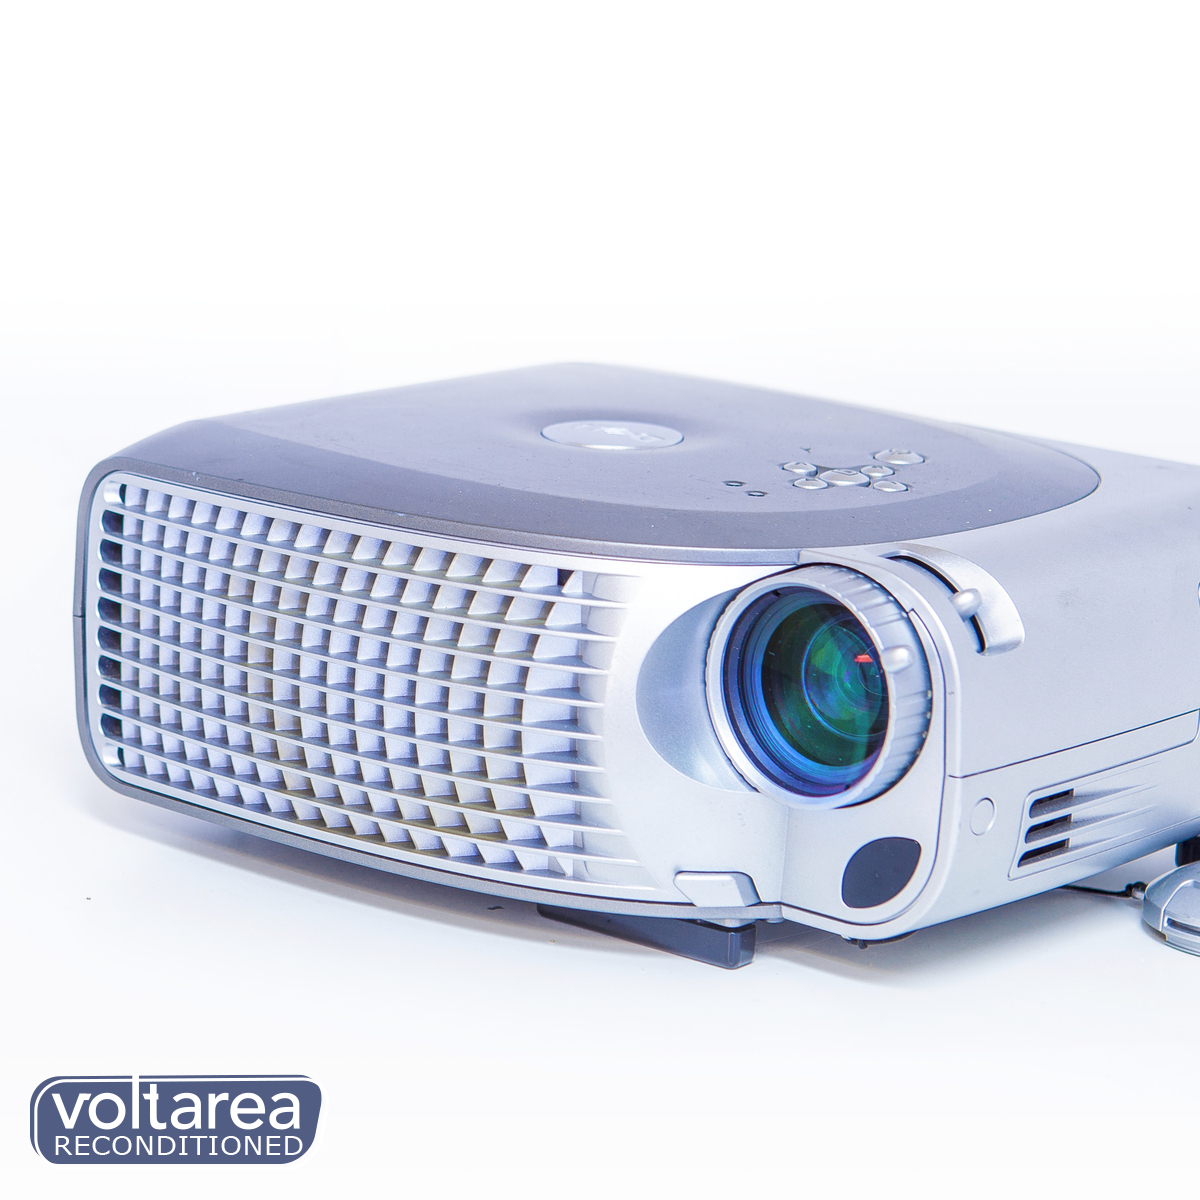 Dell 1200MP Projector RECONDITIONED